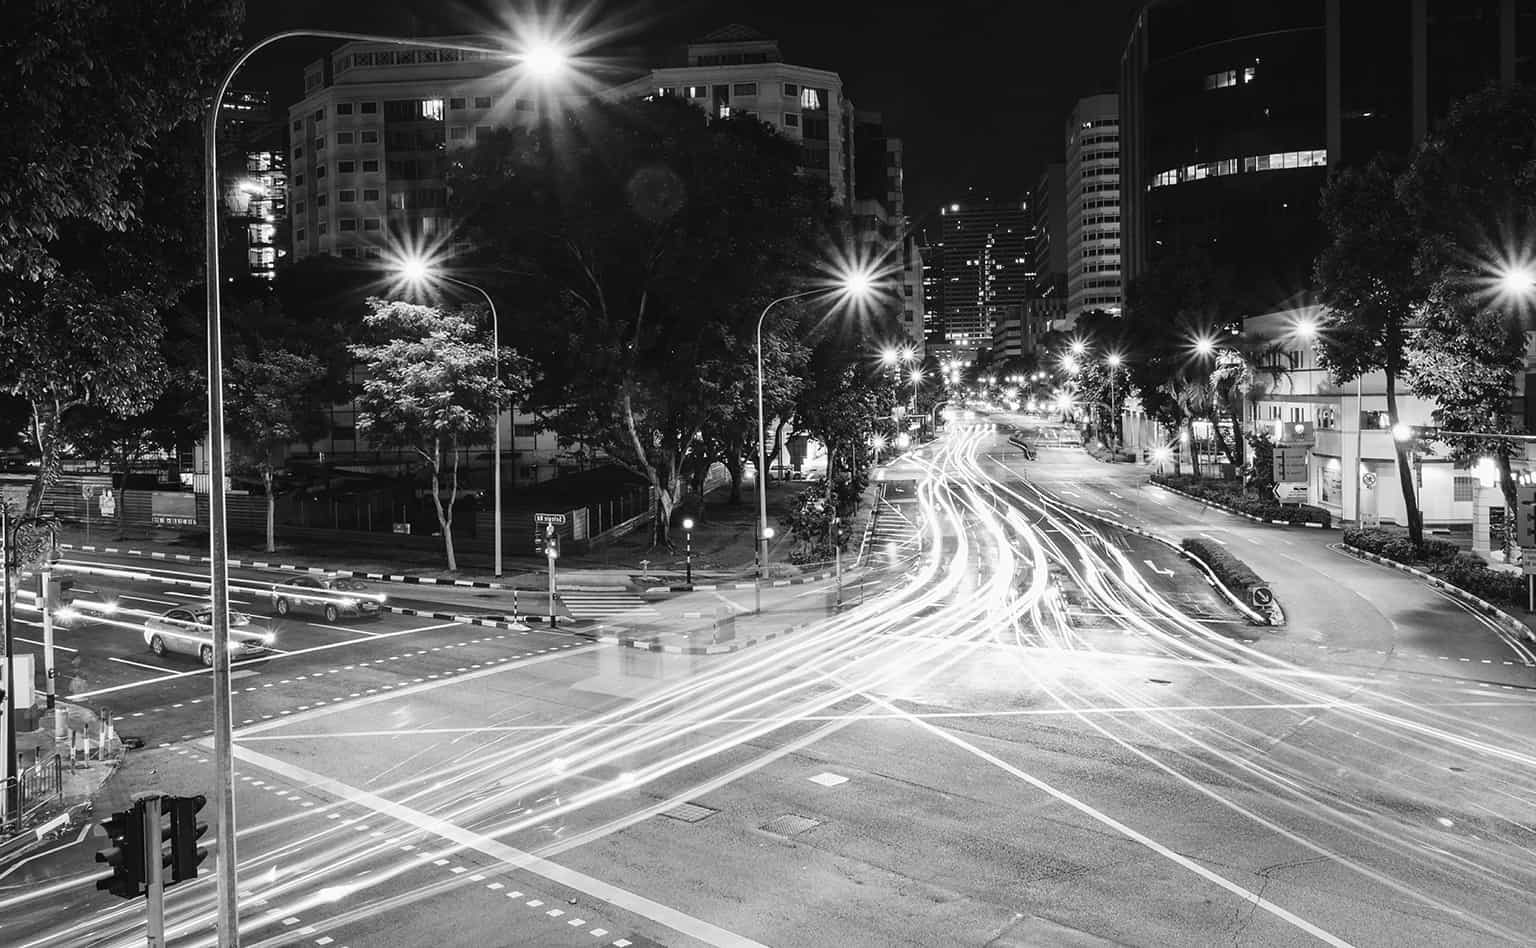 Black and white image of busy traffic intersection at night.